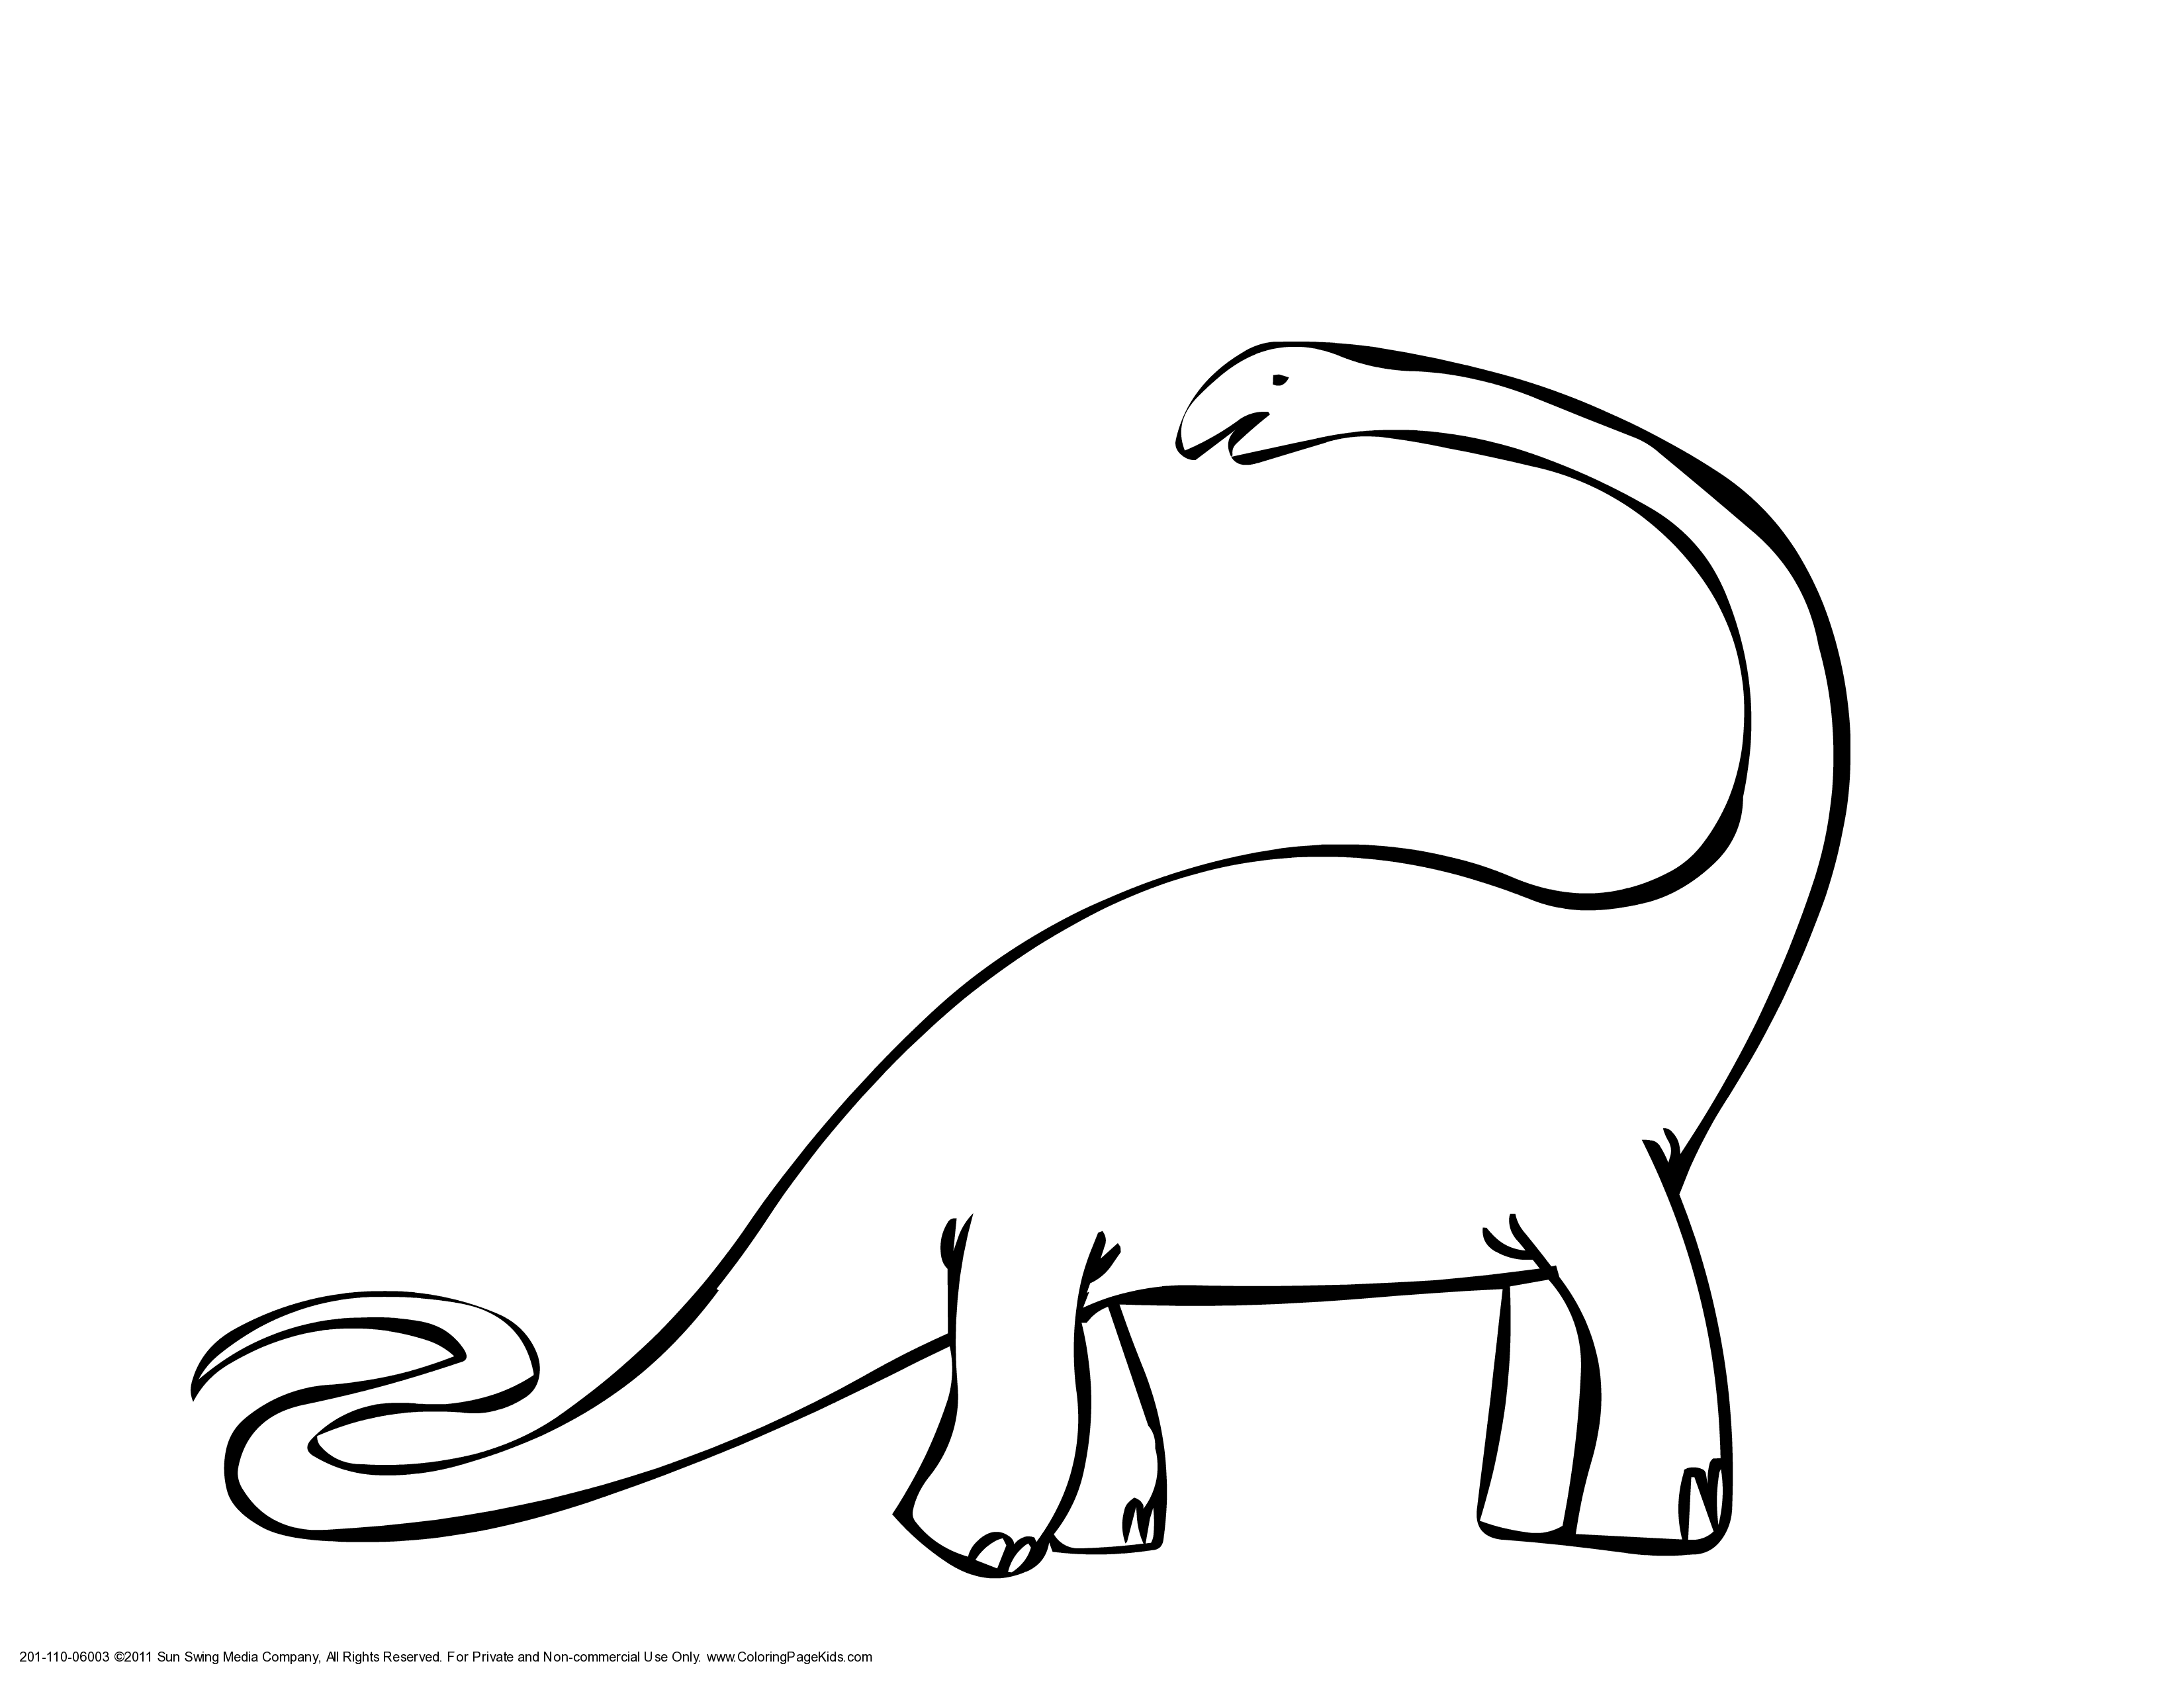 Dinosaur Outline - Free Clipart Images